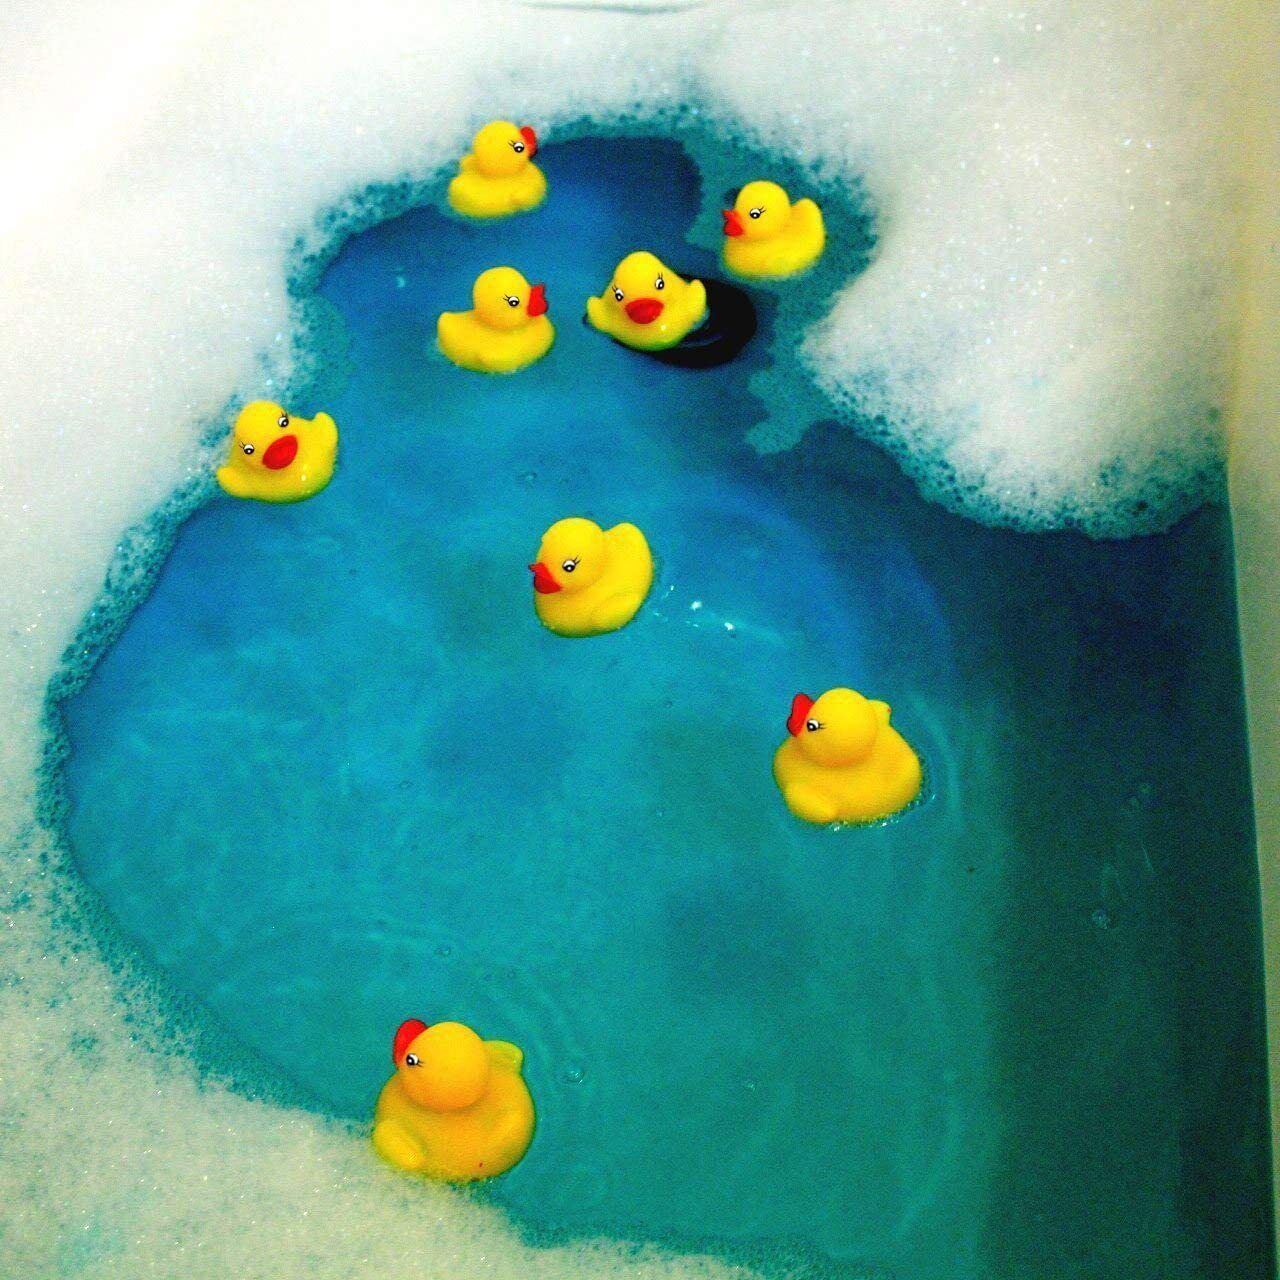 Novelty Place 12-48 Pcs Float Rubber Duck Ducky Baby Bath Toy for Kids Novelty Place Does Not Apply - фотография #4